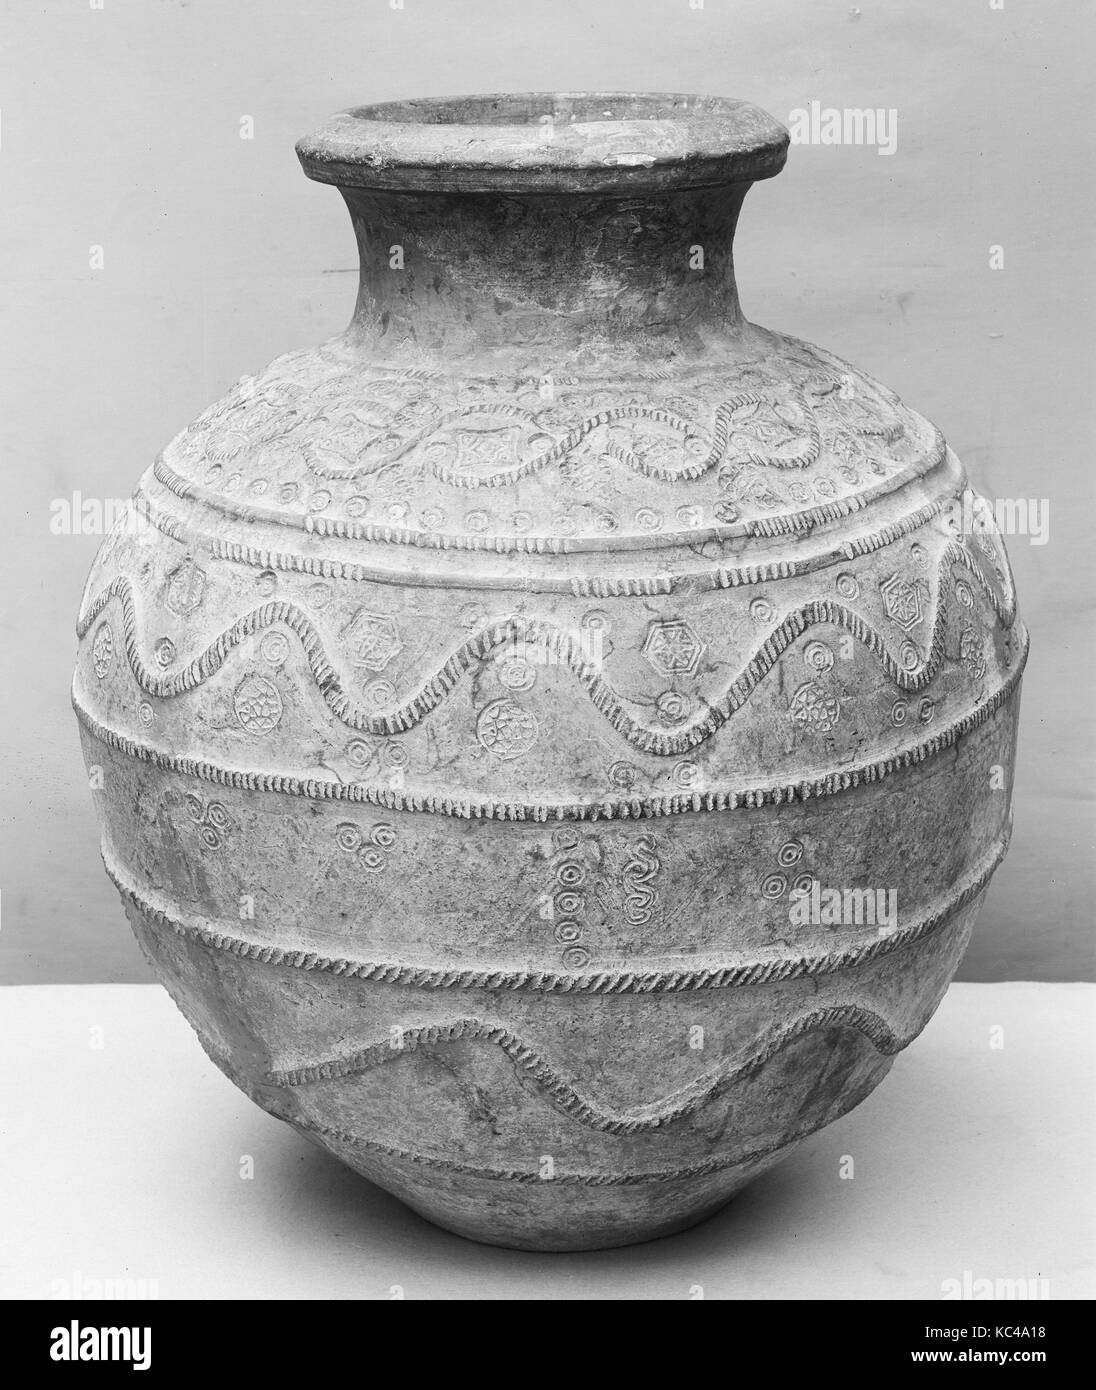 Jar, 13th–14th century, Made in Spain or North Africa, Earthenware, 29 in. (73.7 cm), Ceramics Stock Photo